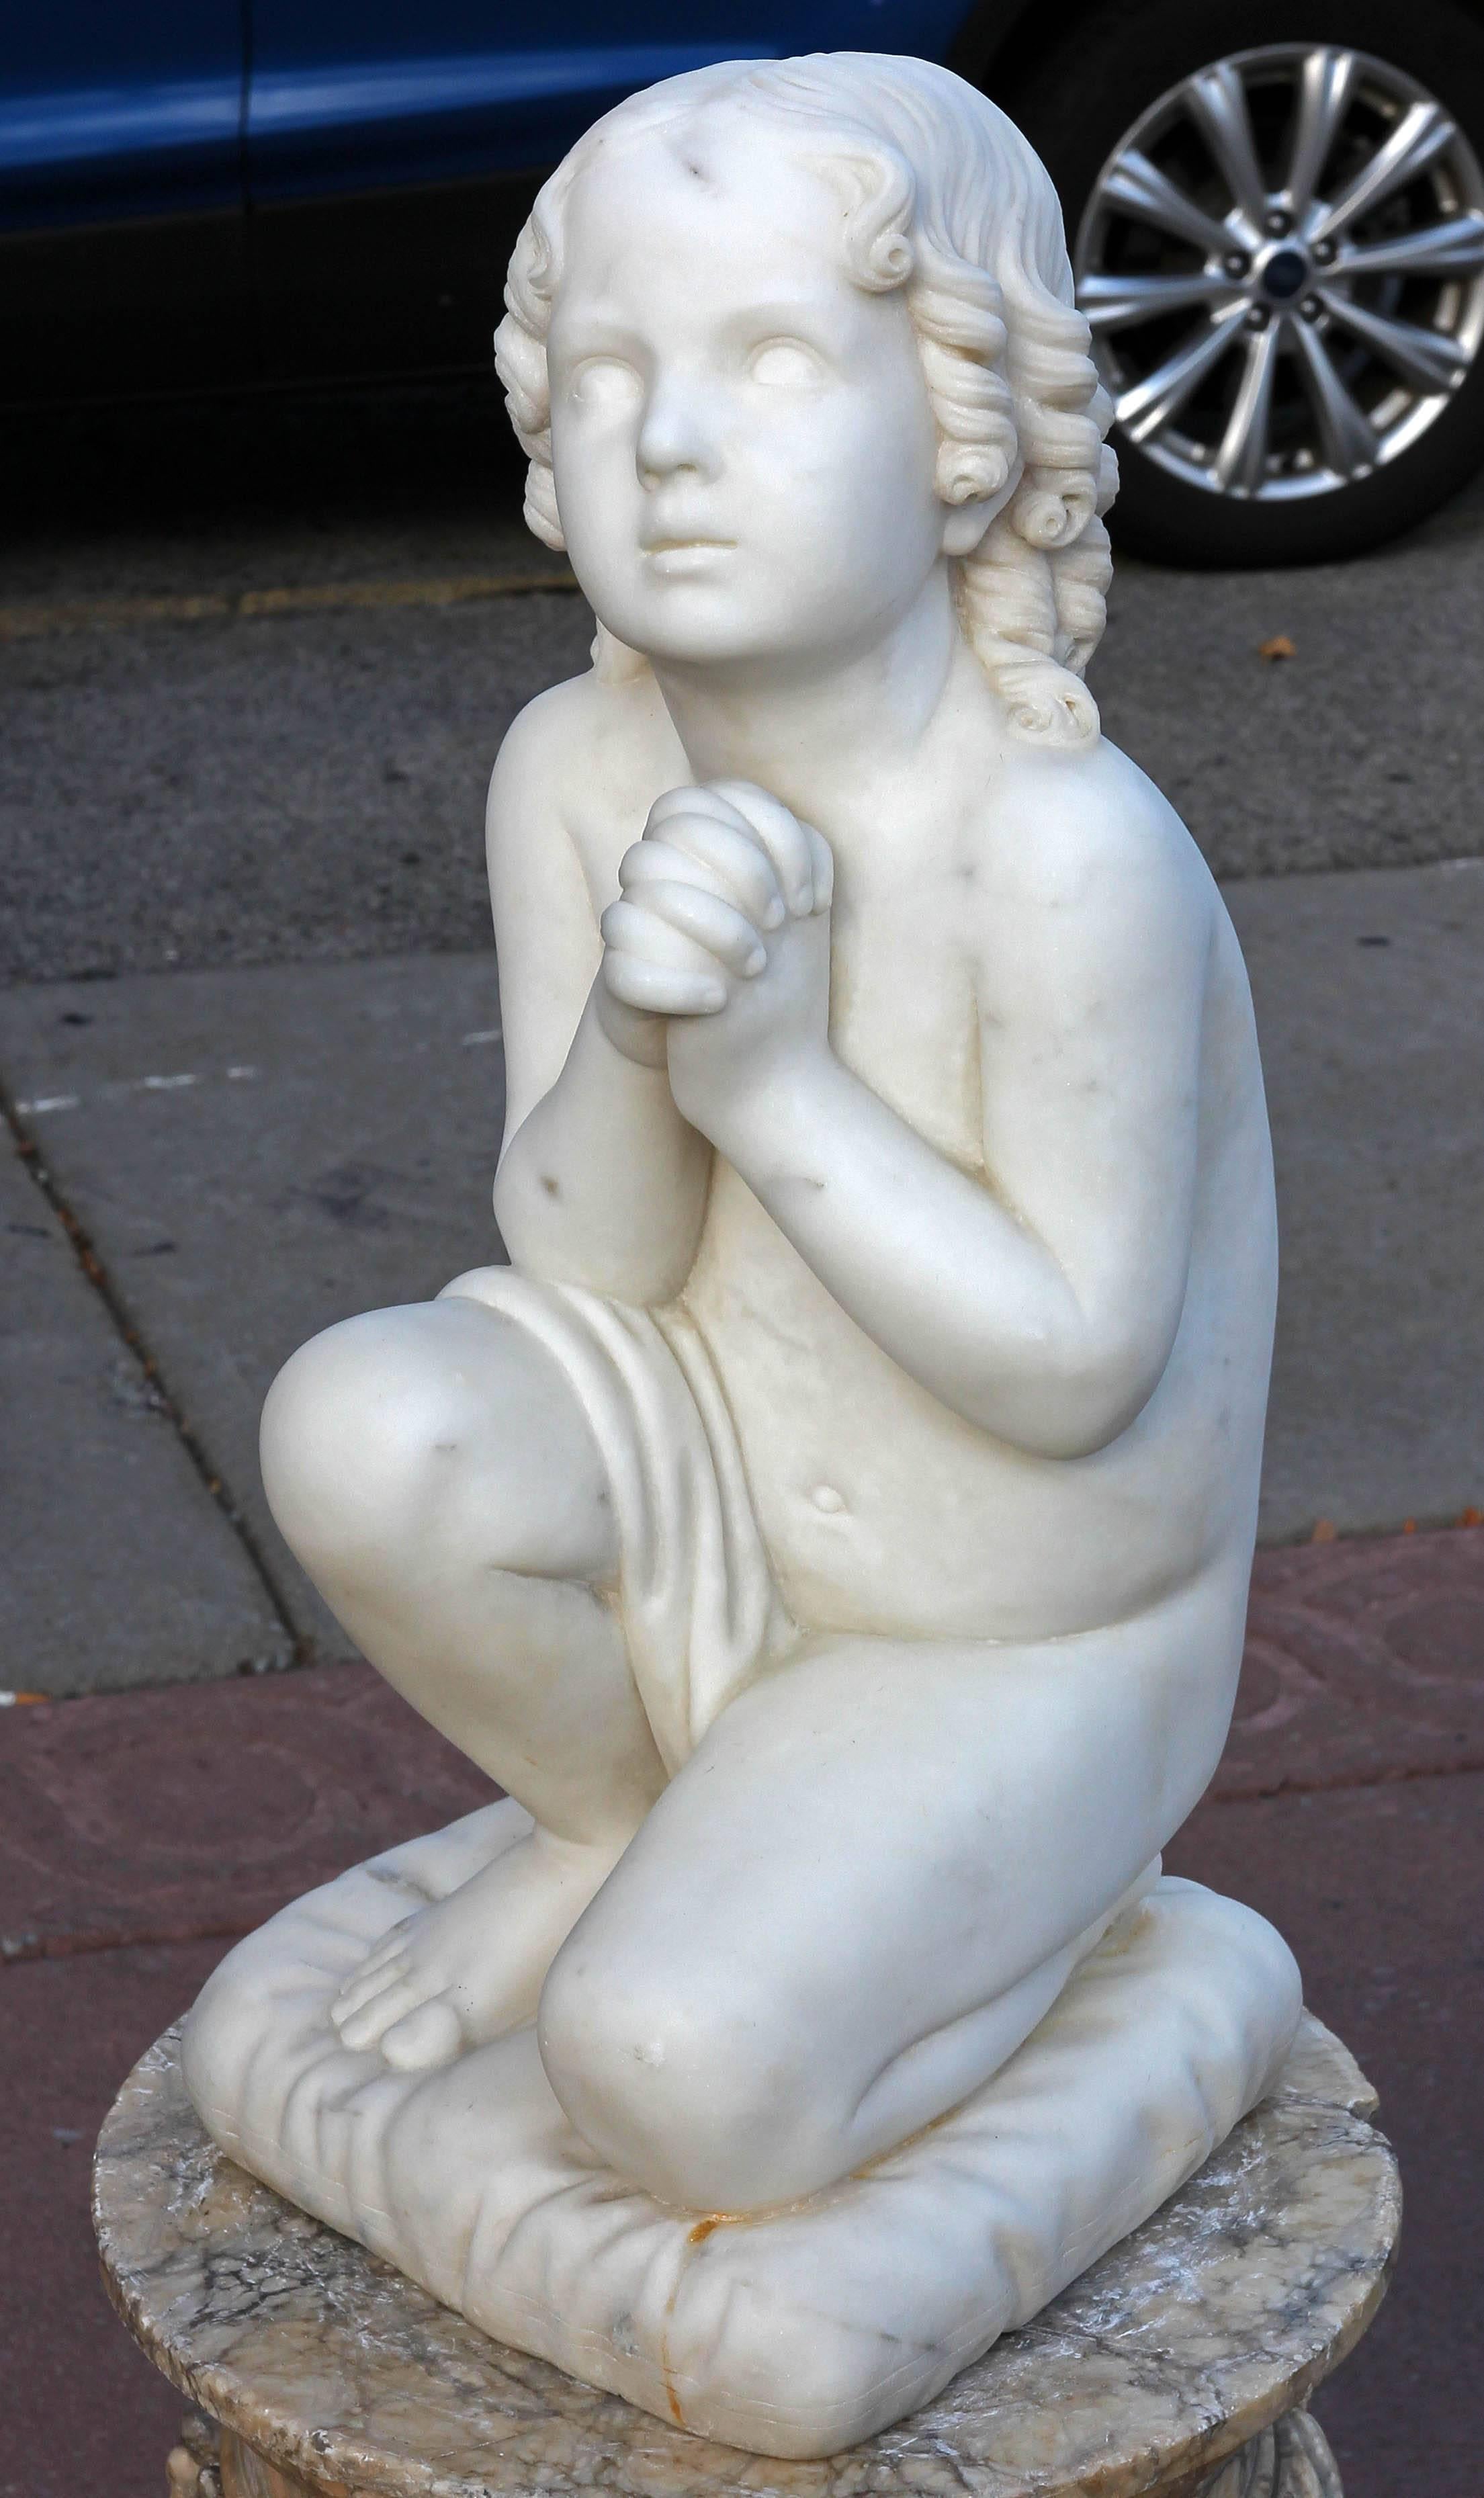 Antique neoclassical marble sculpture of a young boy kneeling. Finely carved. circa mid-19th century. Please, contact us for shipping options.